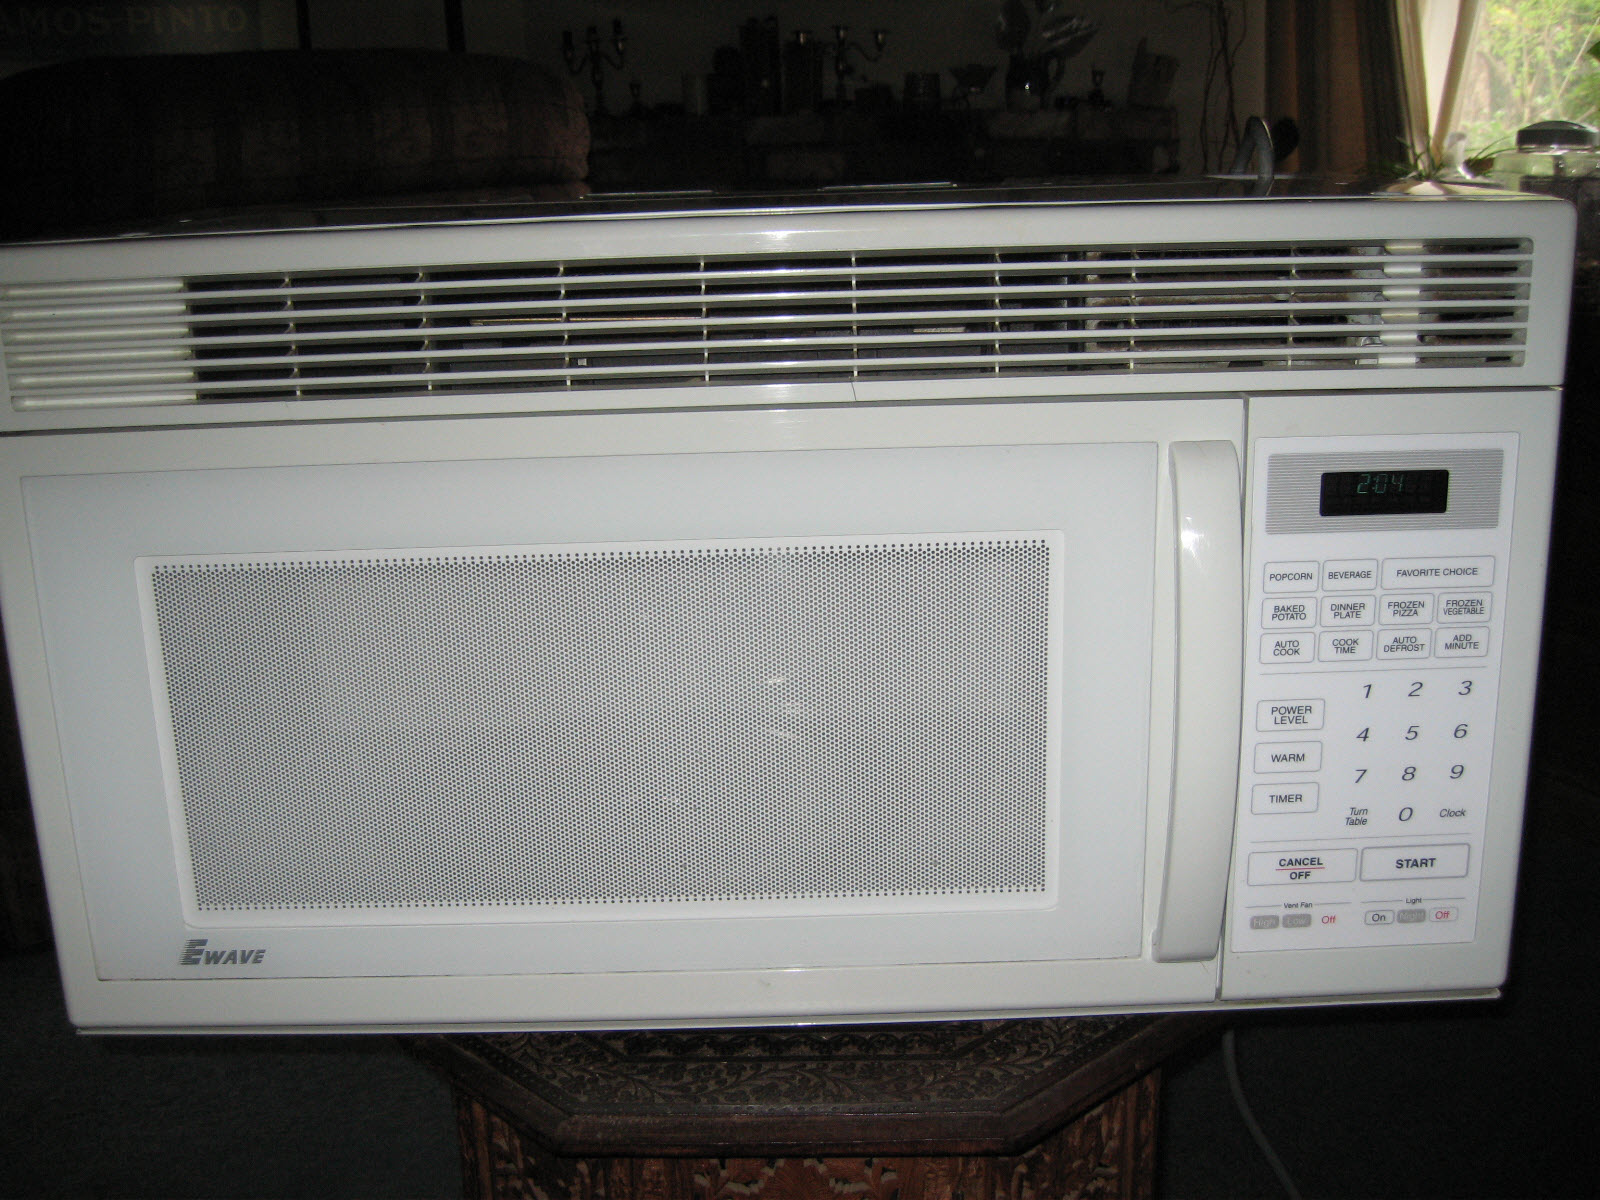 For Sale: **SOLD**EWave Over-the-Range Microwave oven - $40